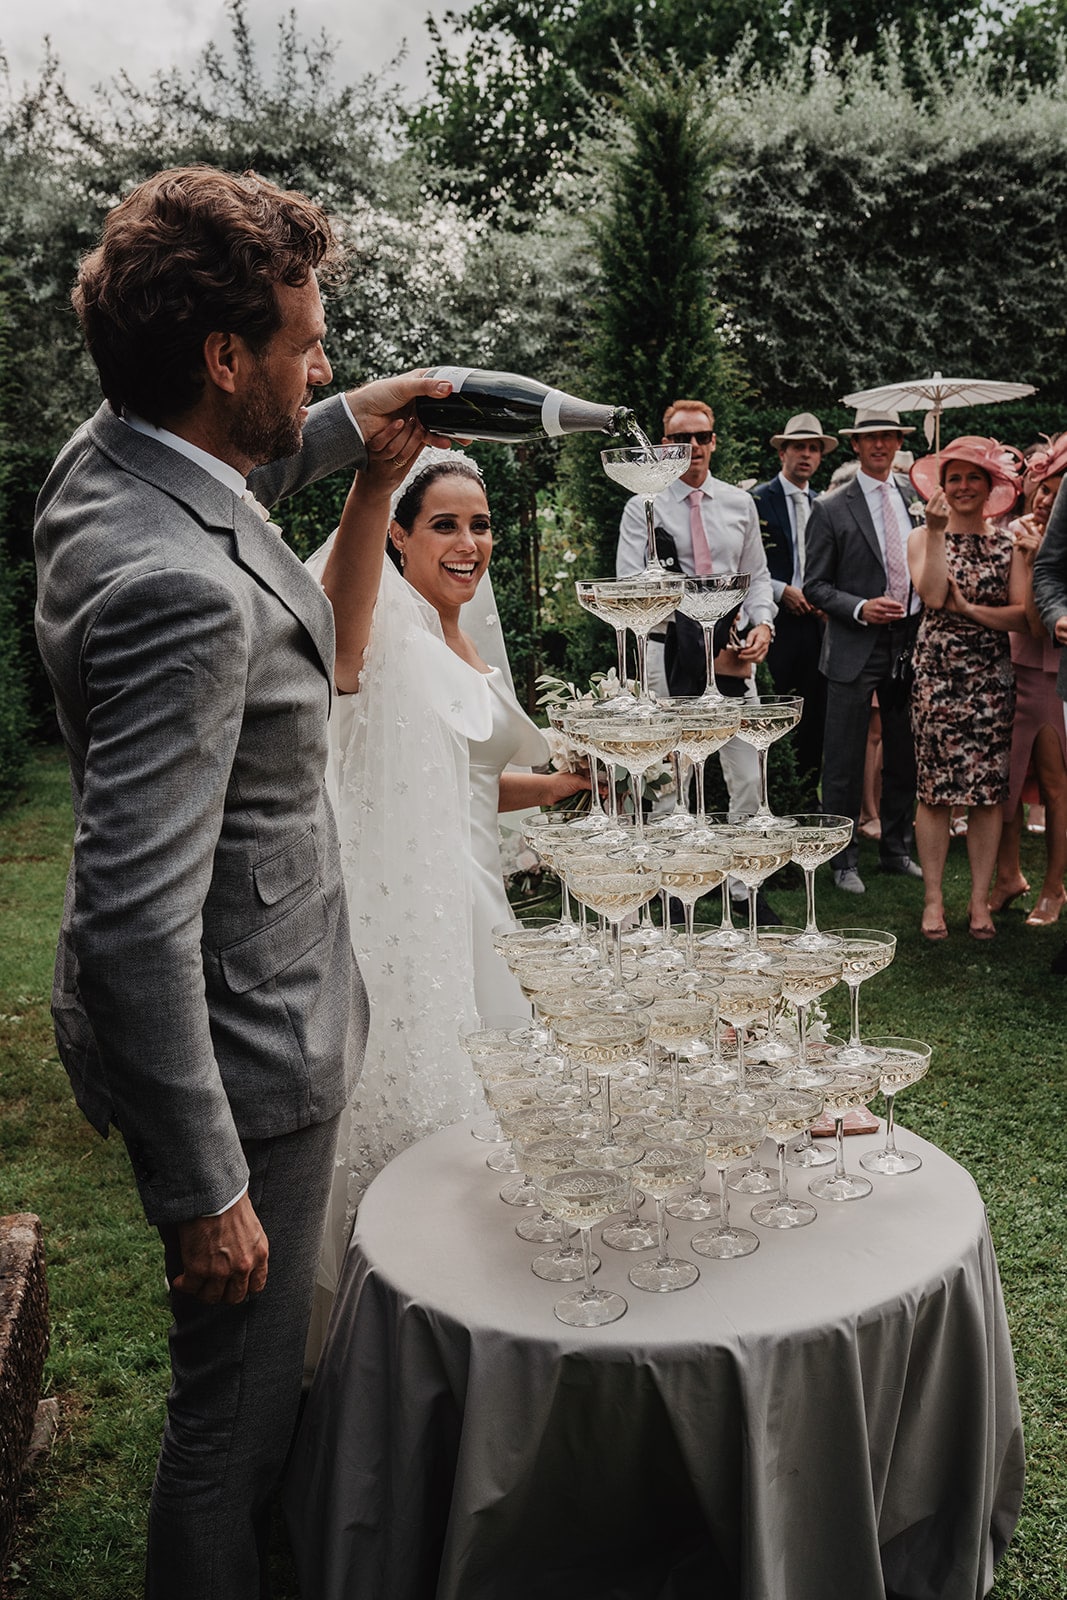 Romantic chic outdoor wedding with a French twist